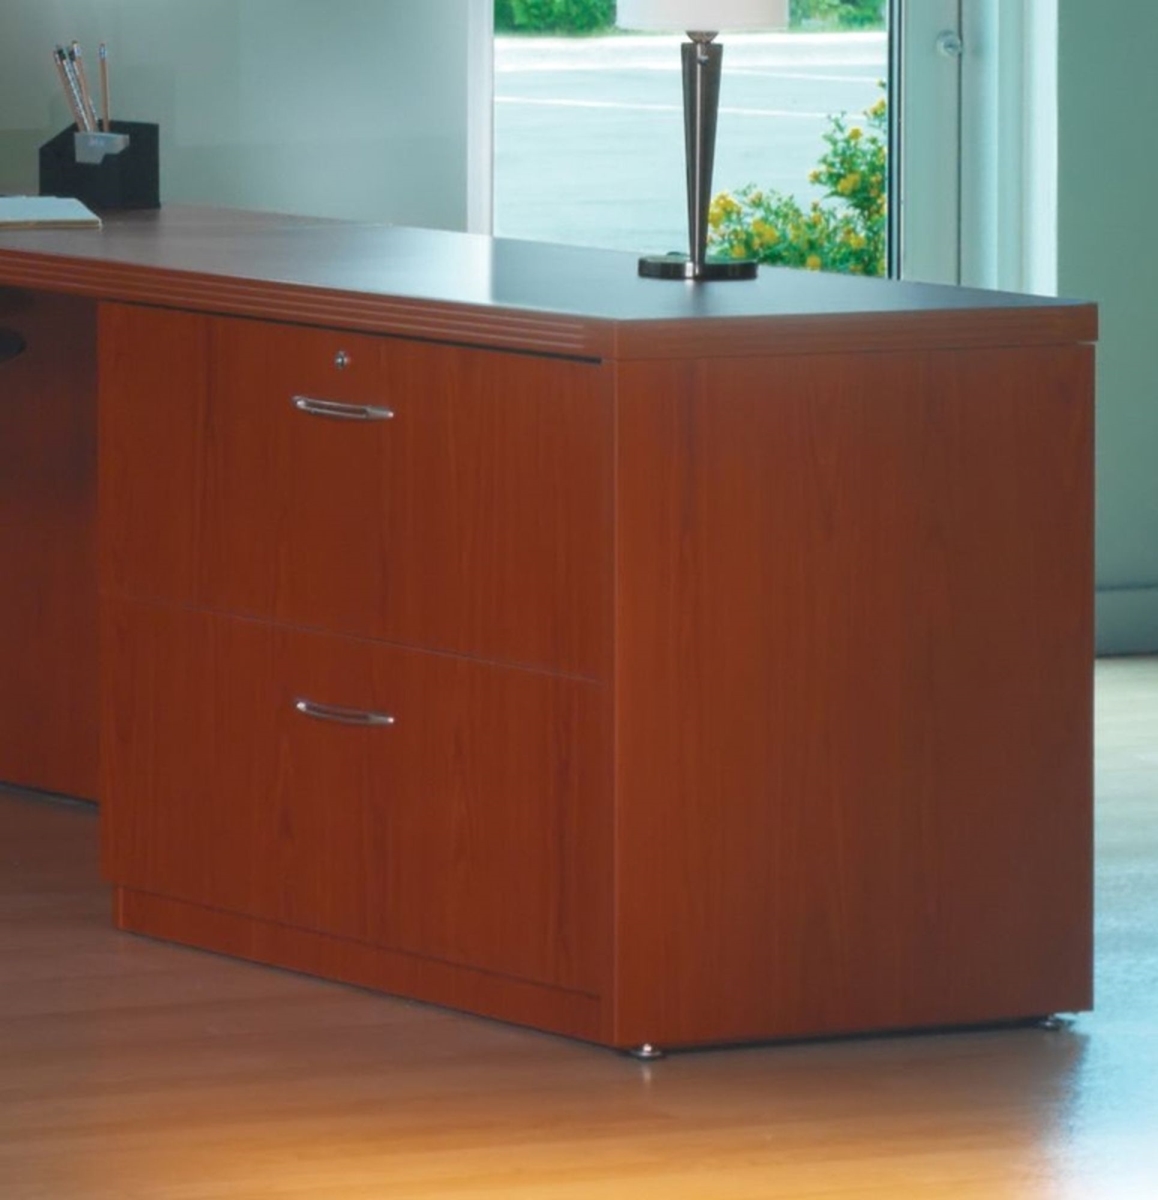 Aclf36lcr Aberdeen Series Credenza, Return & Extended Corner Lateral File, Cherry - 27.5 X 36 X 20 In.